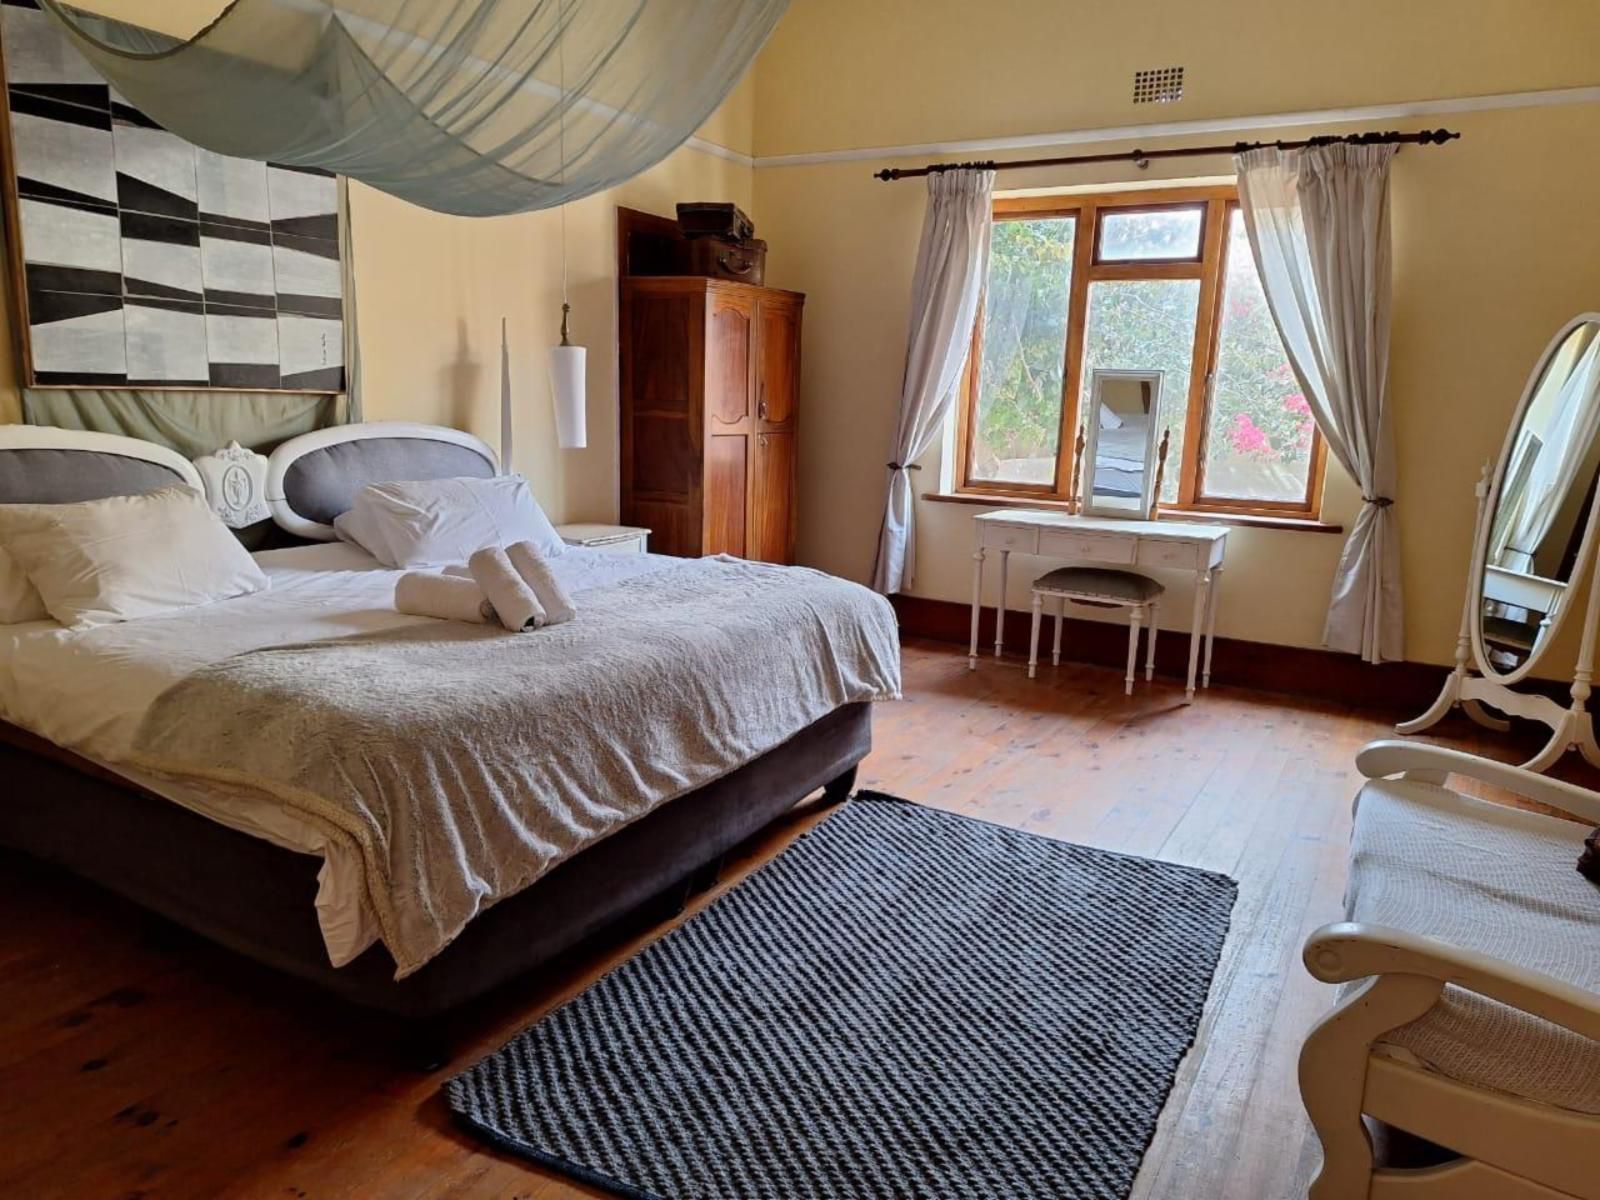 Yield House On Beach Road Port Nolloth Northern Cape South Africa Bedroom